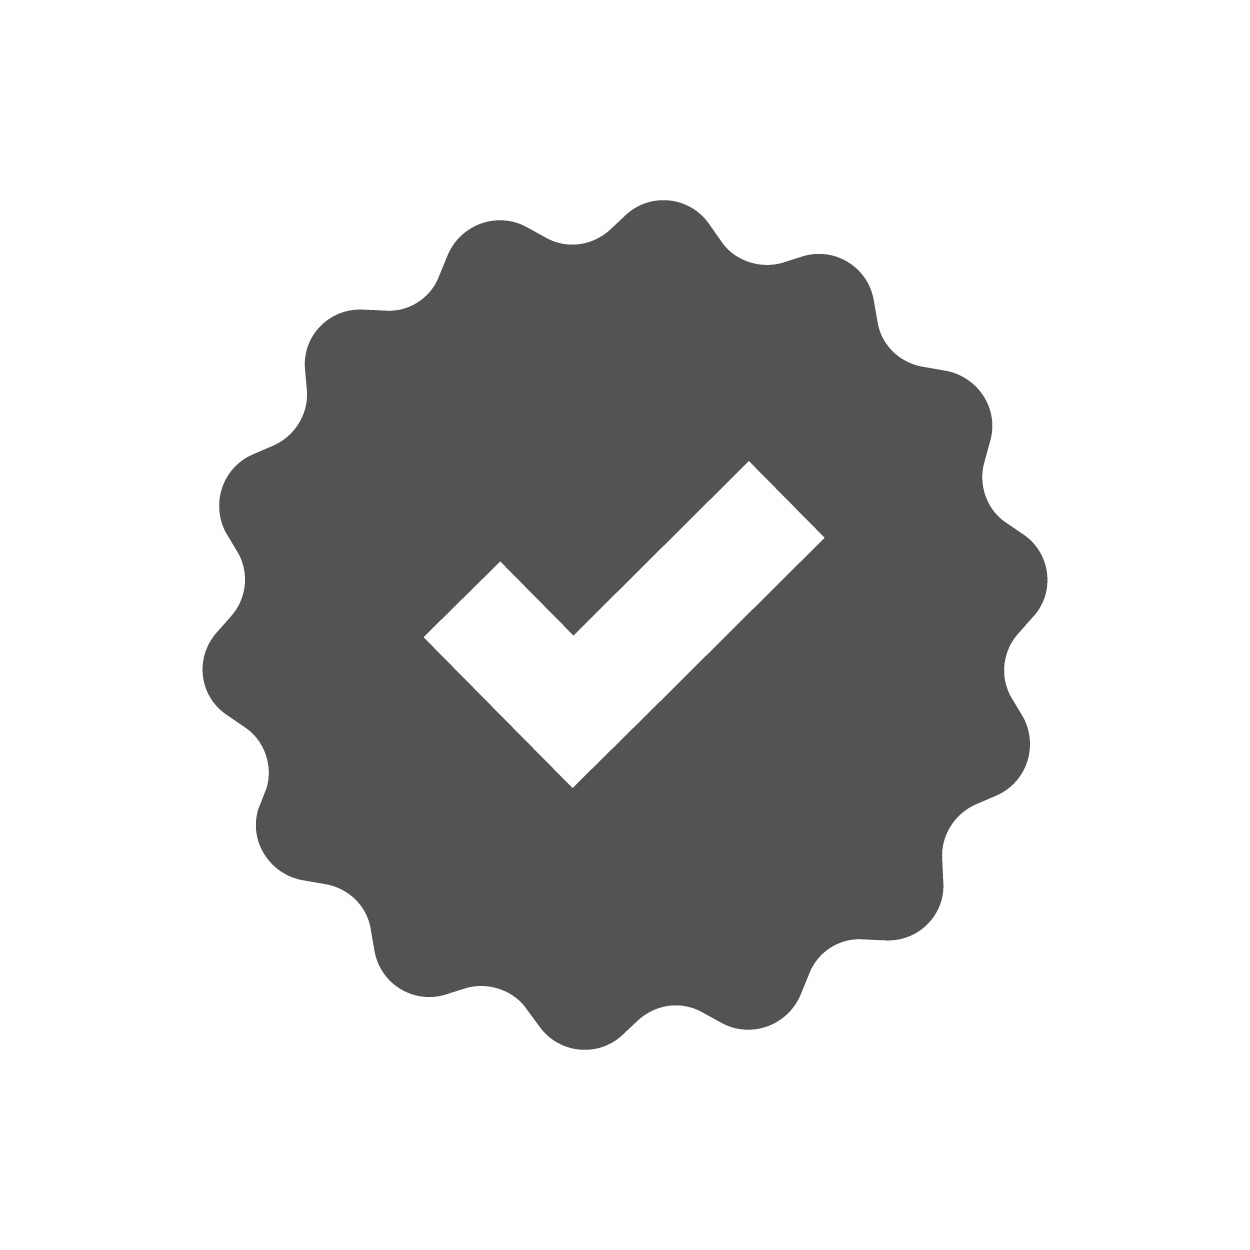 verified by Gregor Cresnar from the Noun Project